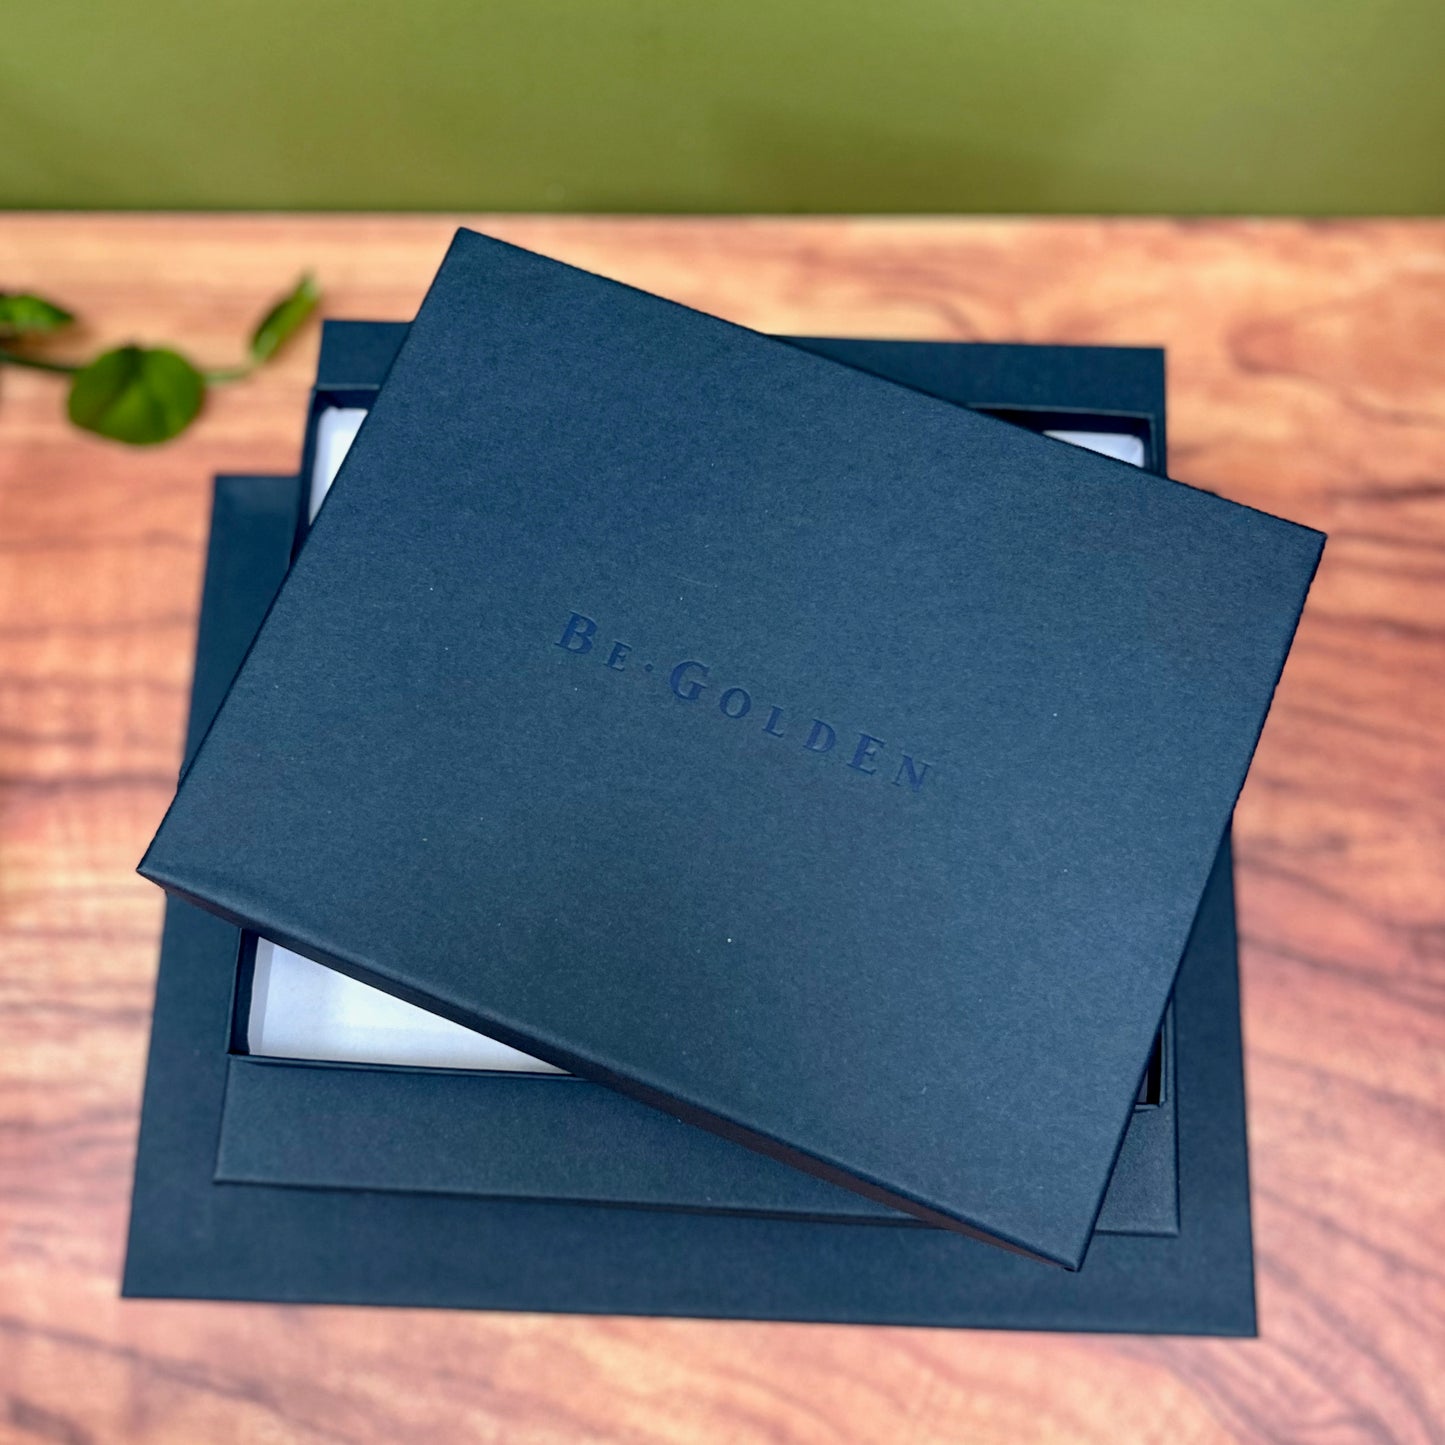 on a wooden table lies a pile of blue presentation boxes. The presentation boxes have been embossed with the brand begolden